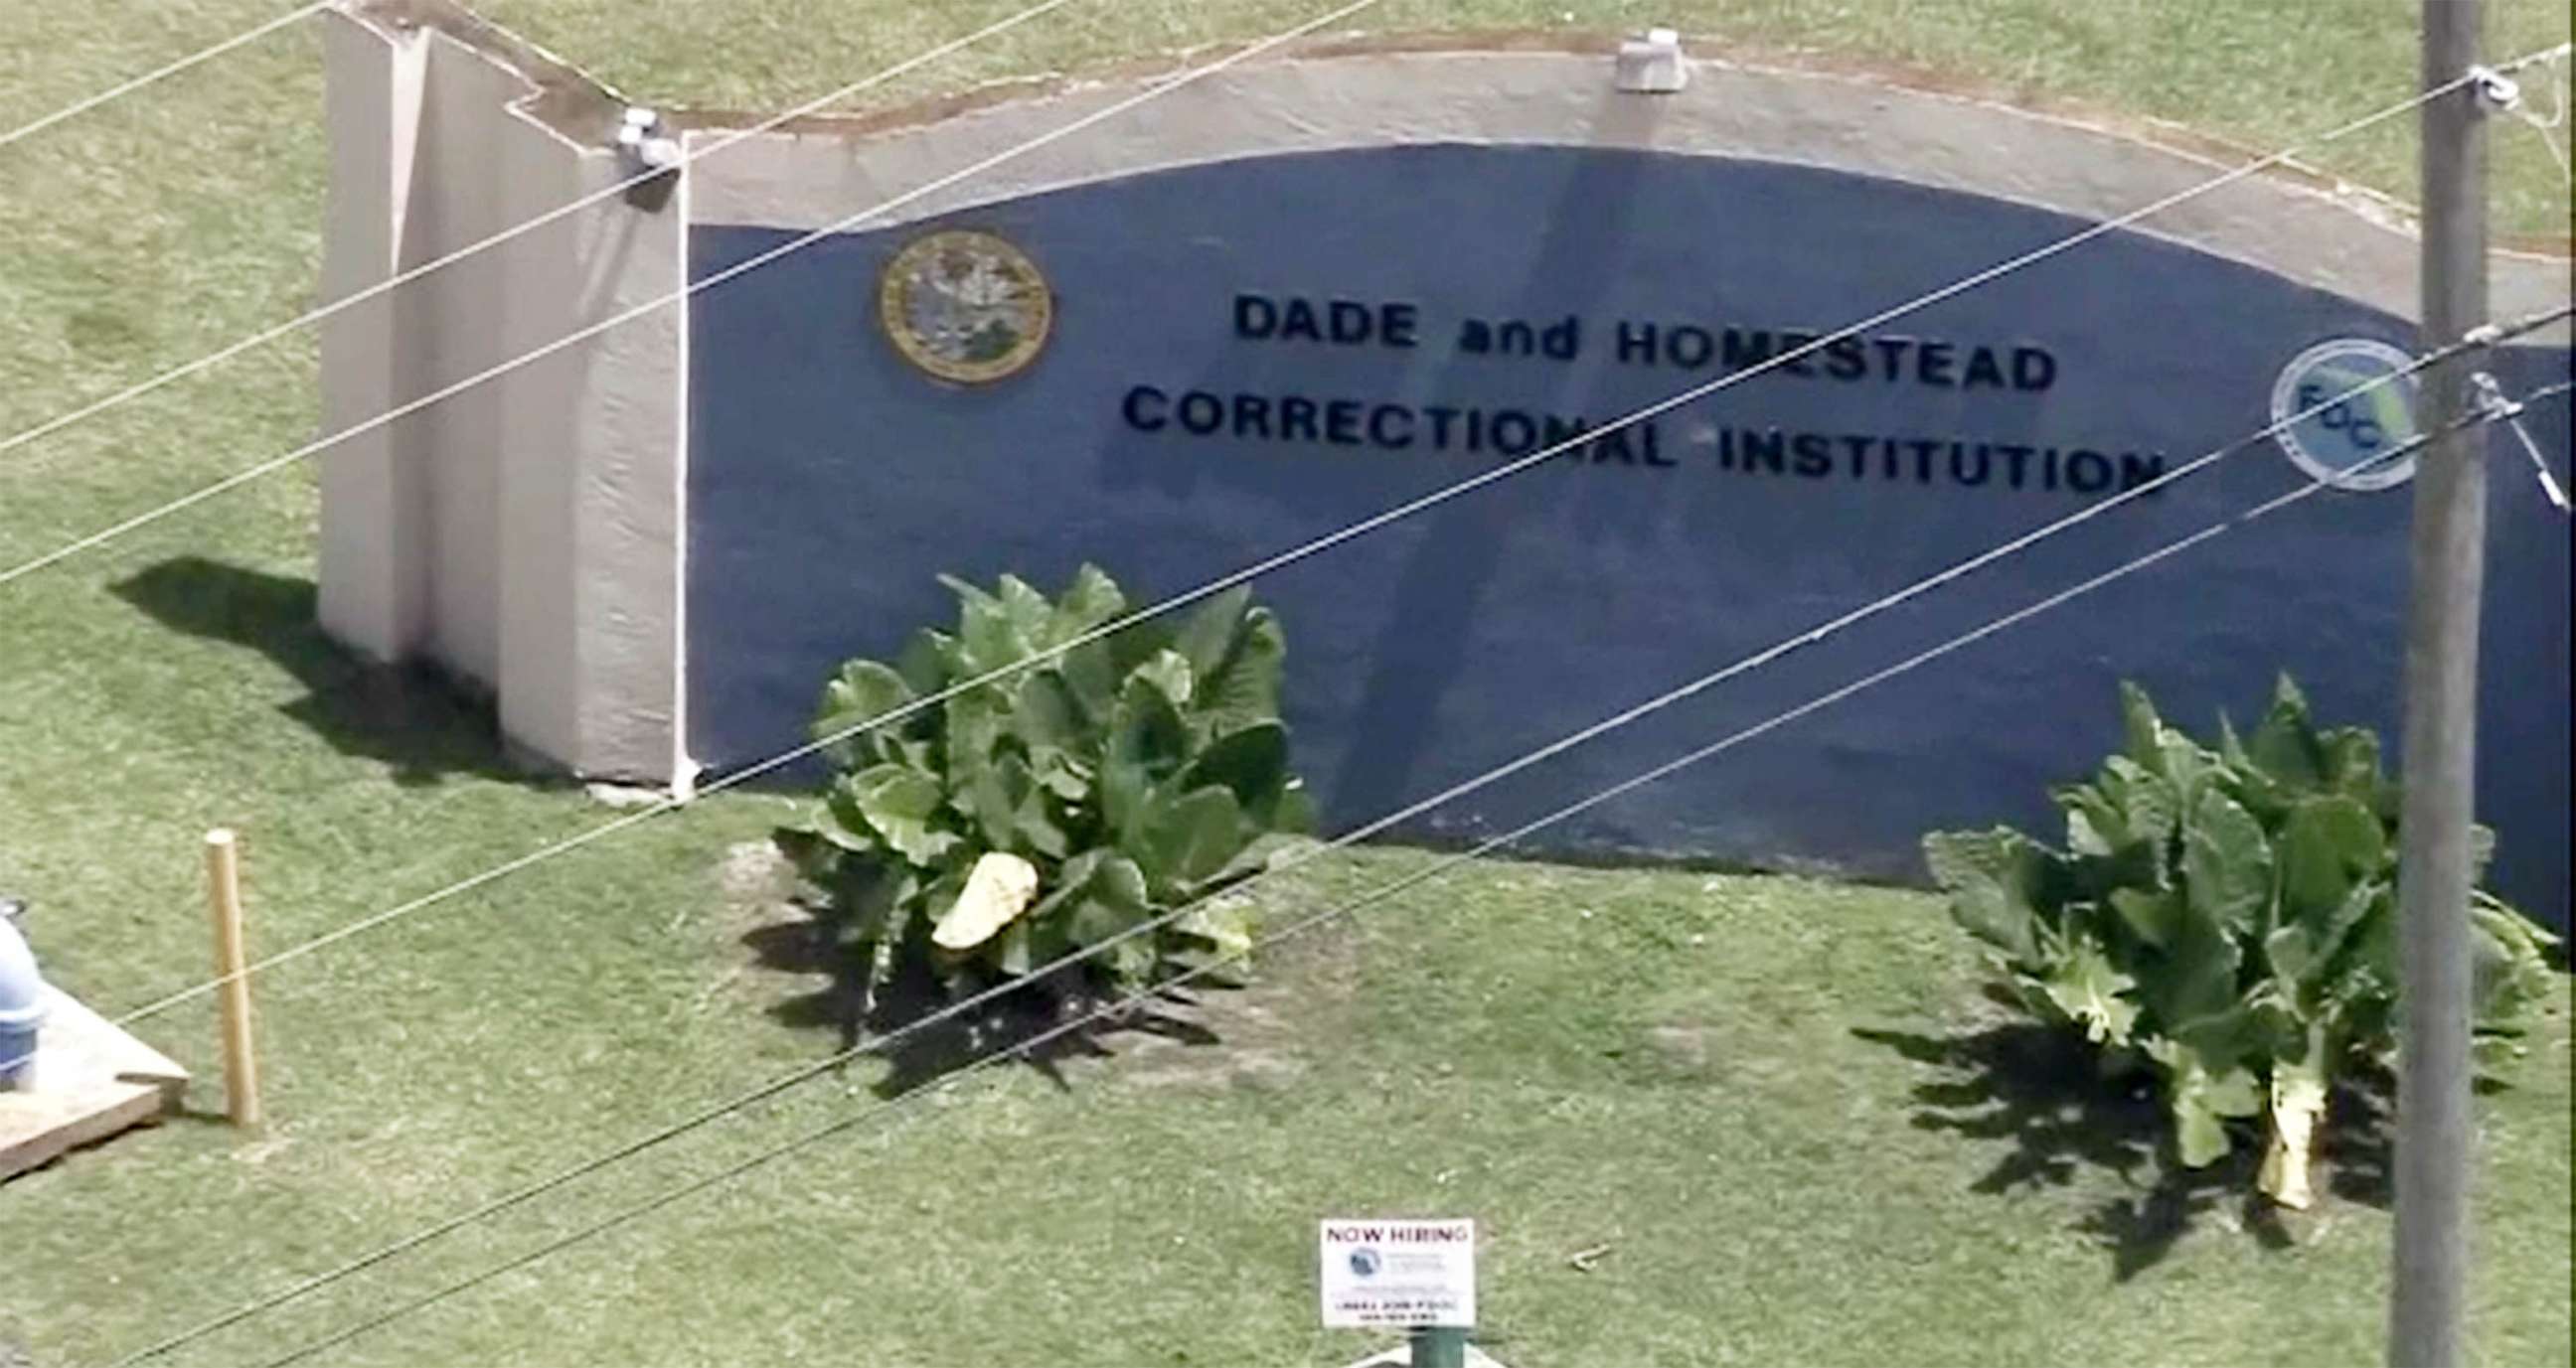 PHOTO: An aerial view shows the Dade and Homestead Correctional Institution in Miami-Dade County, Fla., April 28, 2022.